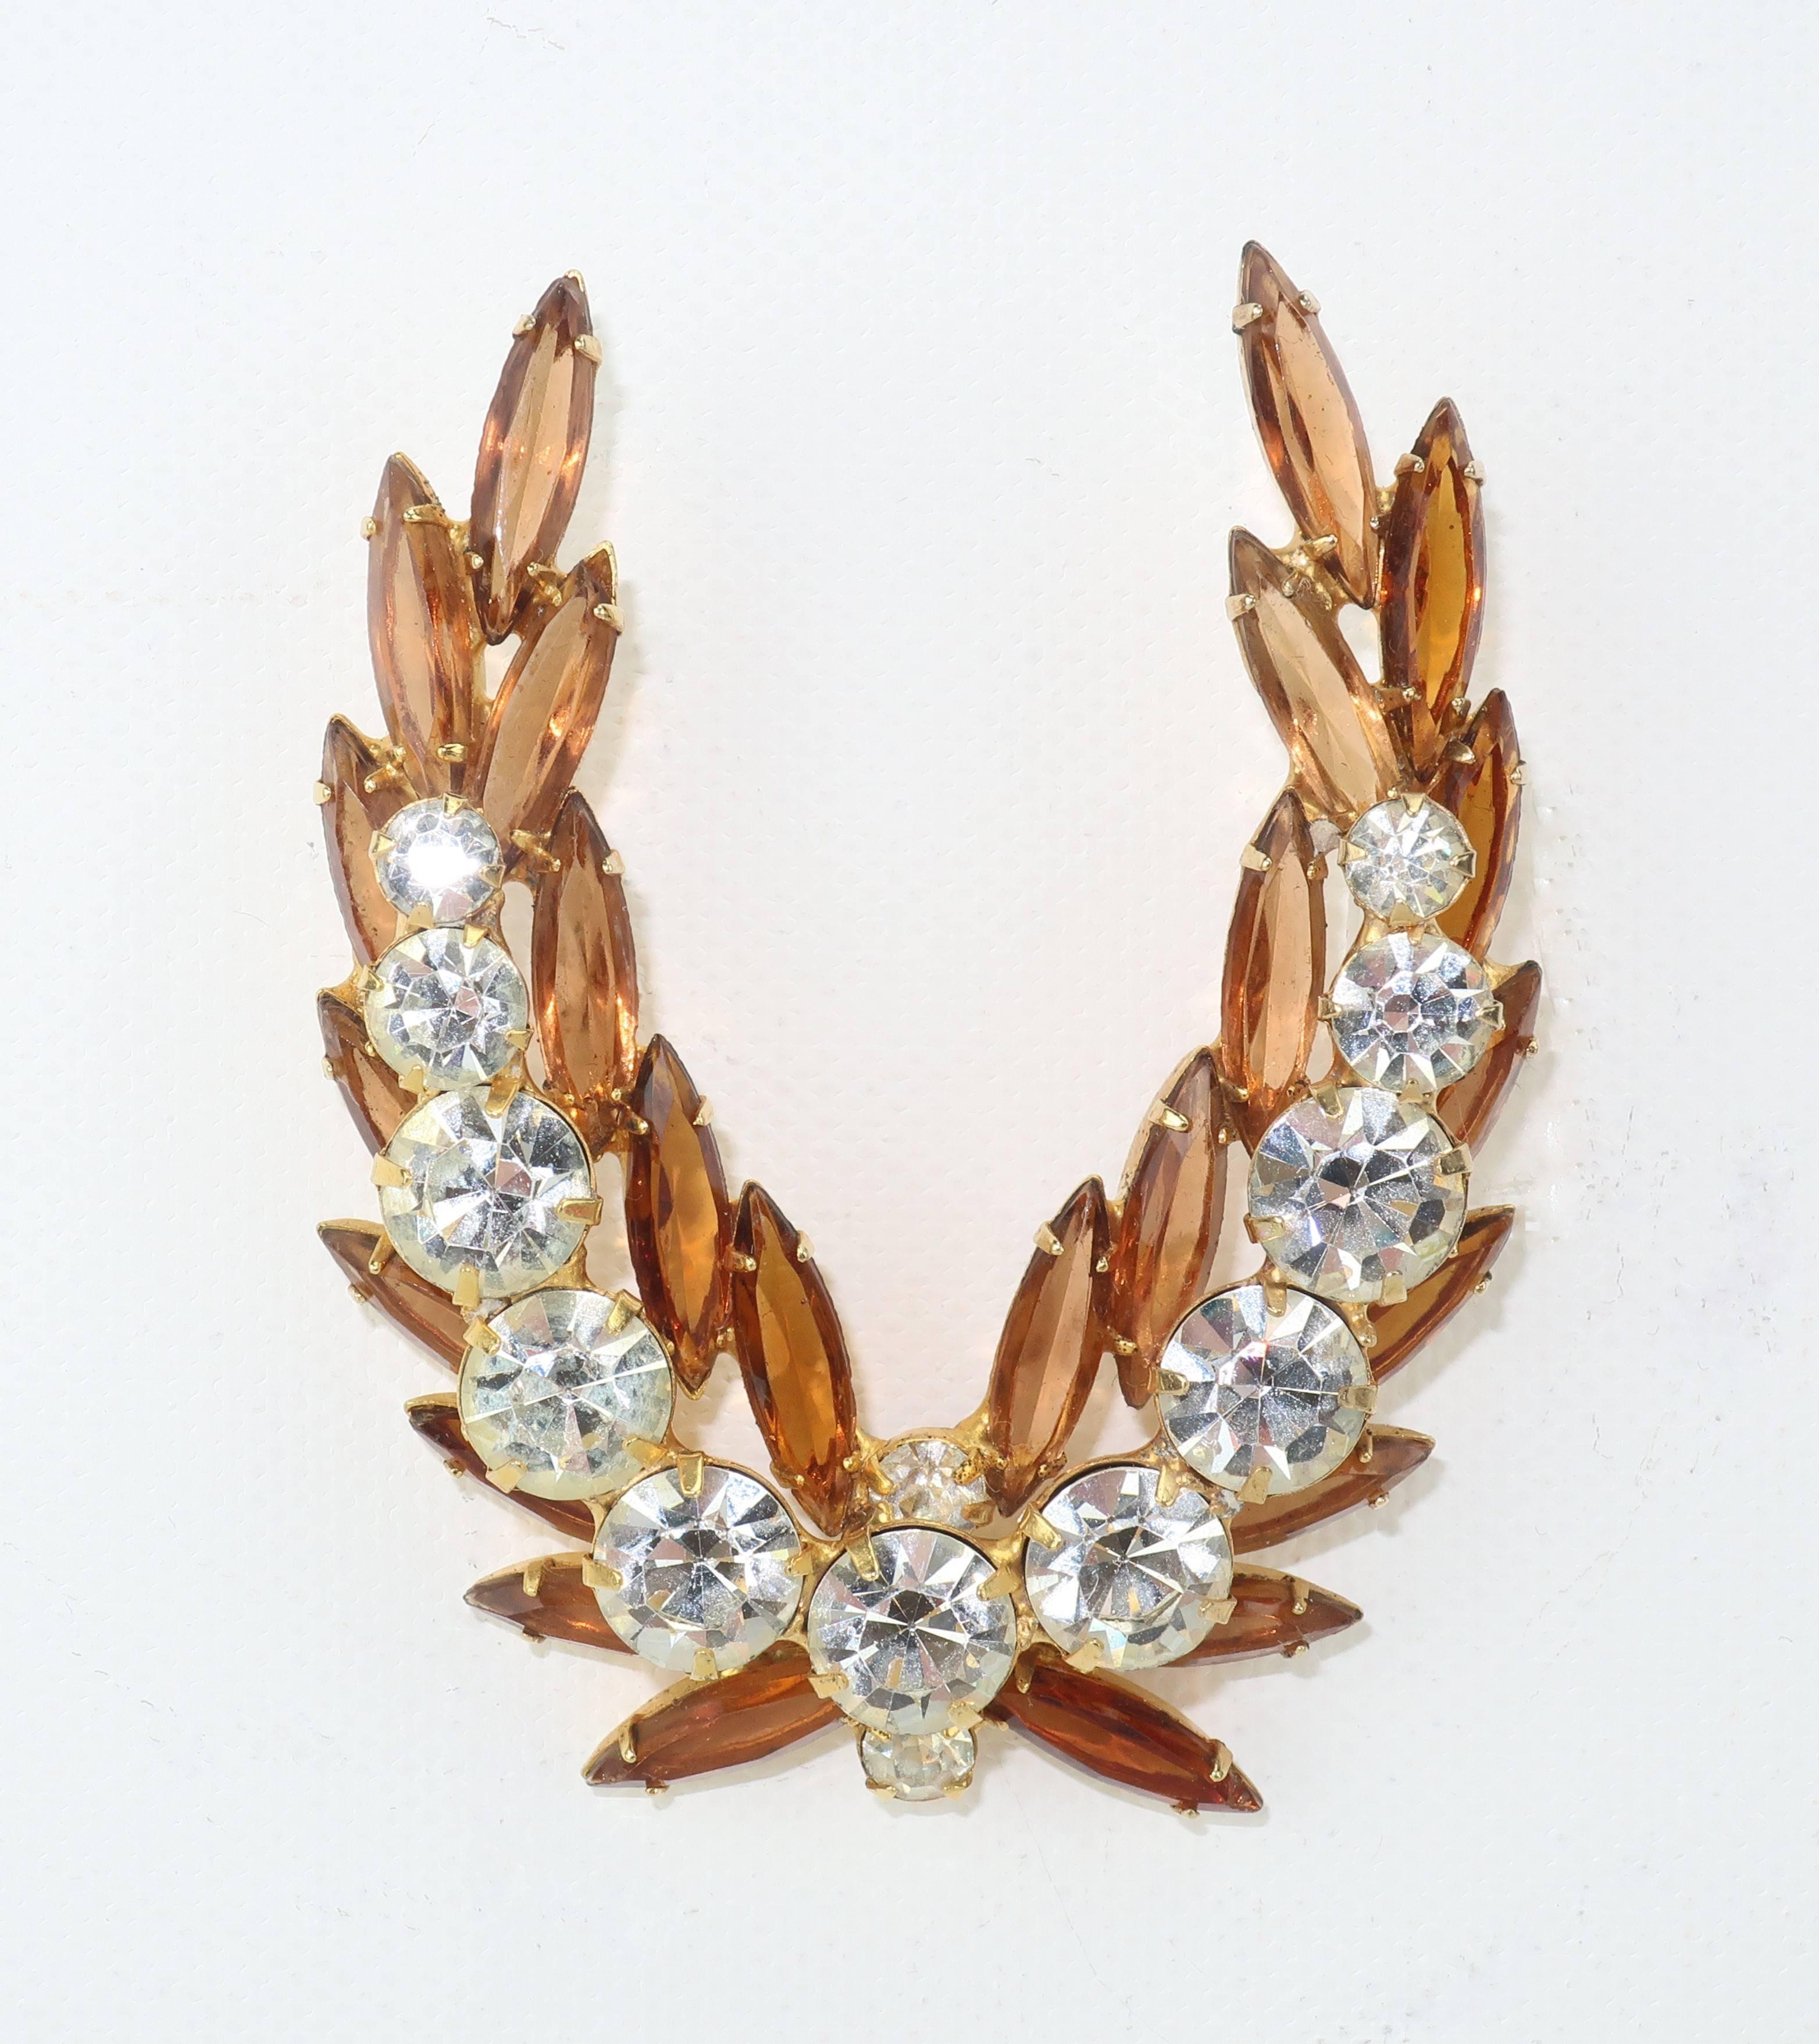 Laurel leaves are a symbol of victory used in ancient Greece to decorate both military heroes and meritorious athletes.  What better way to display your sartorial prowess then with this 1950's rhinestone brooch exclaiming a fun fashion 'win'!  The